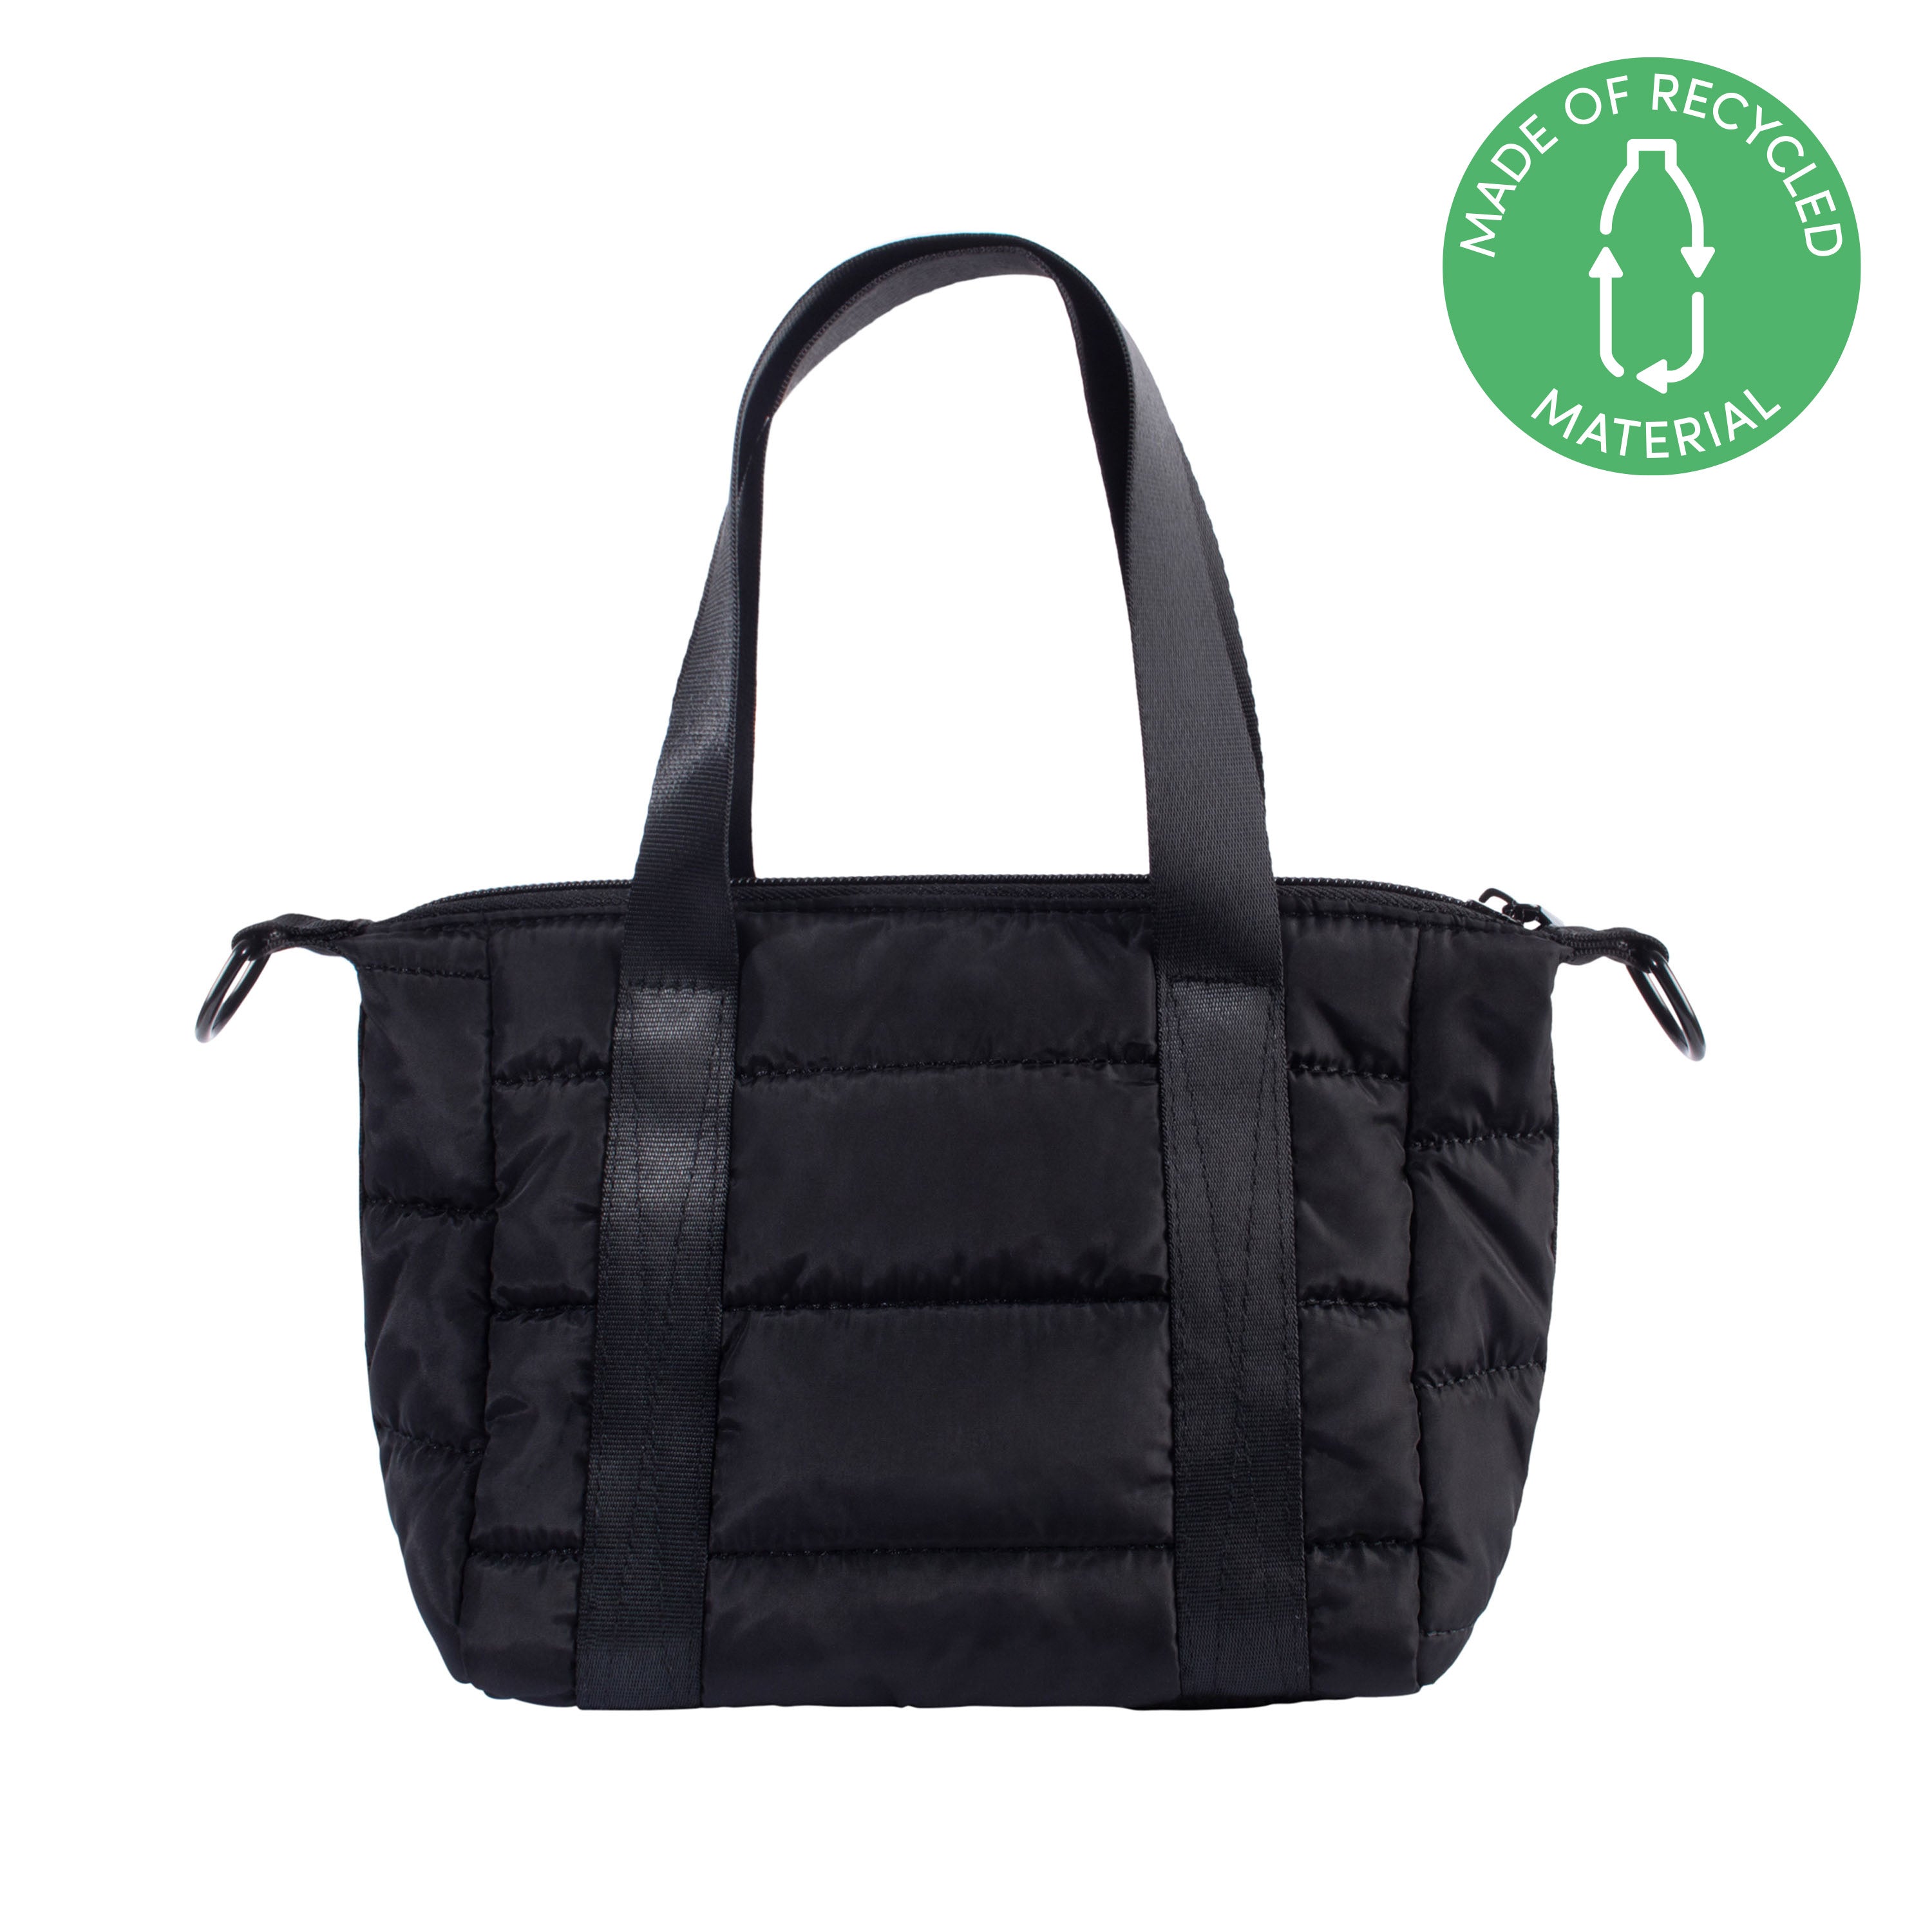 NANO COMMUTER TOTE BAG   RECYCLED COLLECTION BLACK